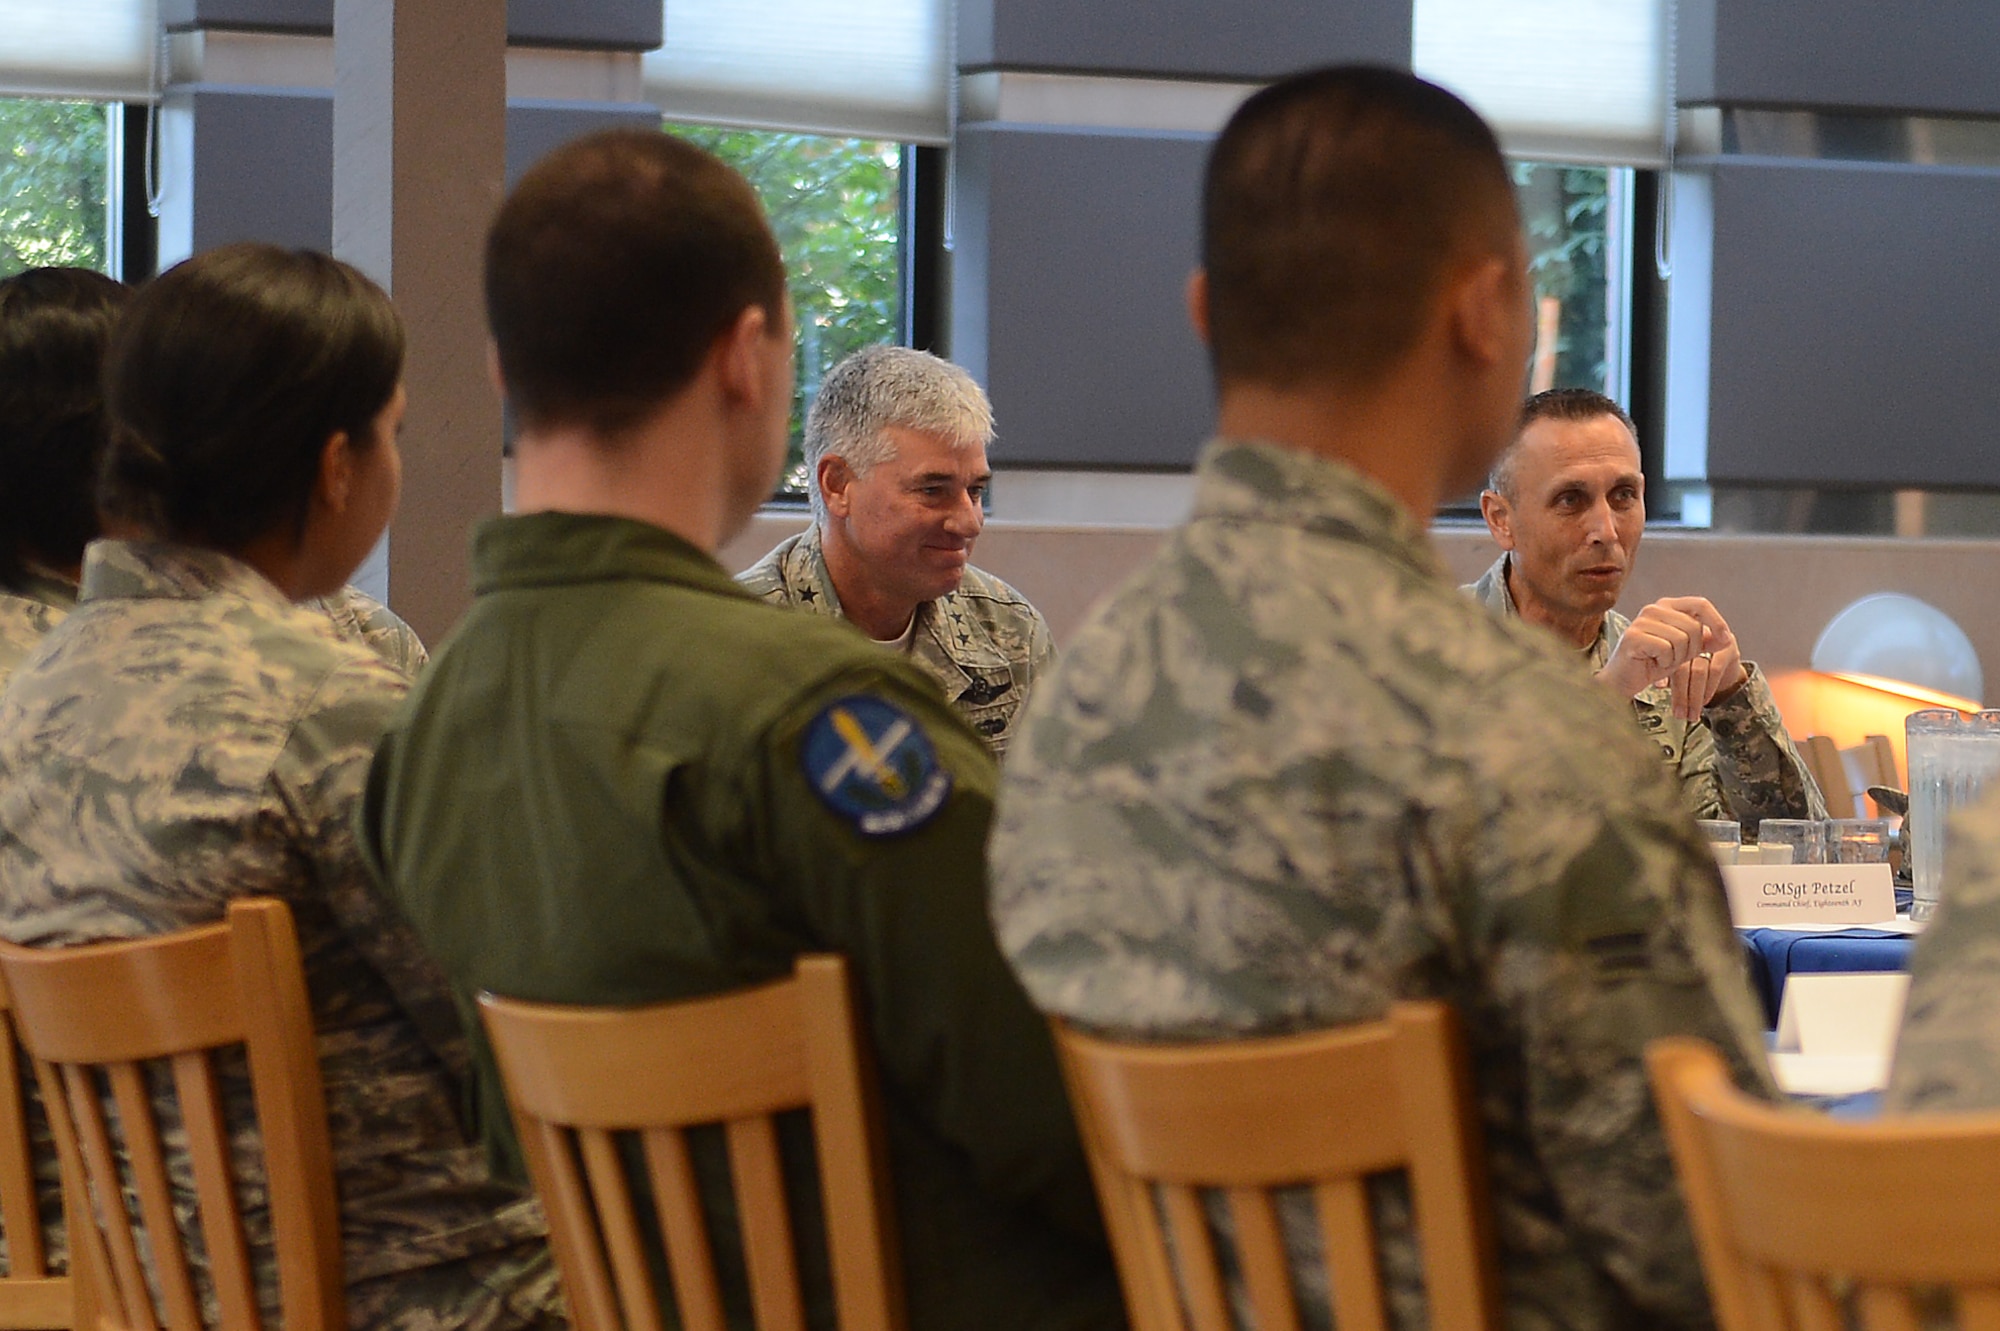 Lt. Gen. Sam Cox (right center), 18th Air Force commander, and Chief Master Sgt. Todd Pezel (right), 18th AF command chief, meet with Team McChord Airmen during their visit at Joint Base Lewis-McChord, Wash., Aug. 18, 2016. The Airmen were selected by their leadership and were afforded the opportunity to ask the general and chief any question they had in regards to the Air Force. (U.S. Air Force photo/Senior Airman Divine Cox) 